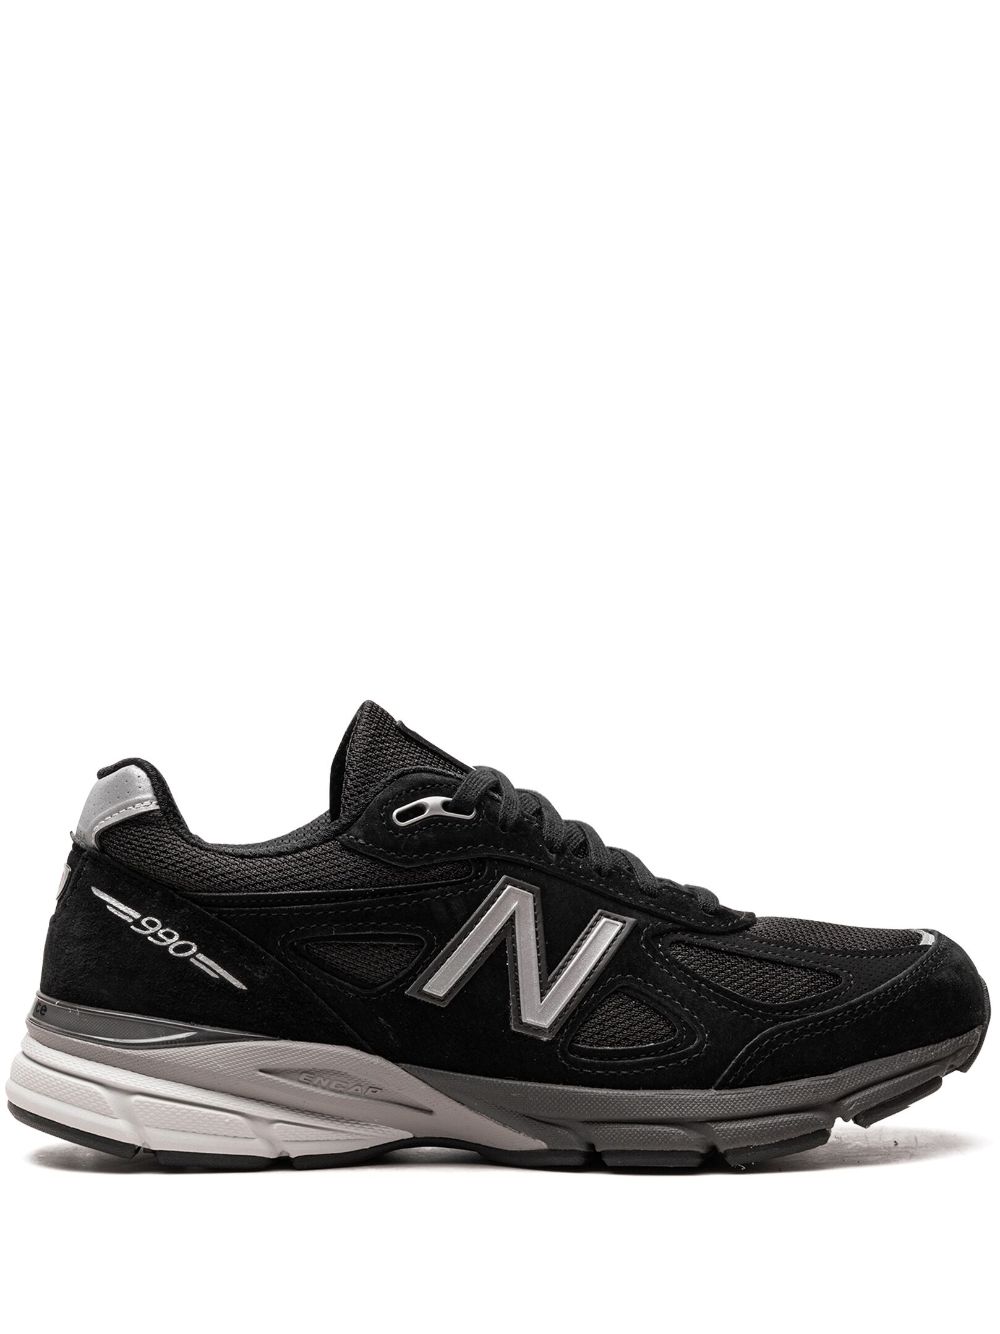 New Balance Made in USA 990v4 "Black/Silver" sneakers von New Balance